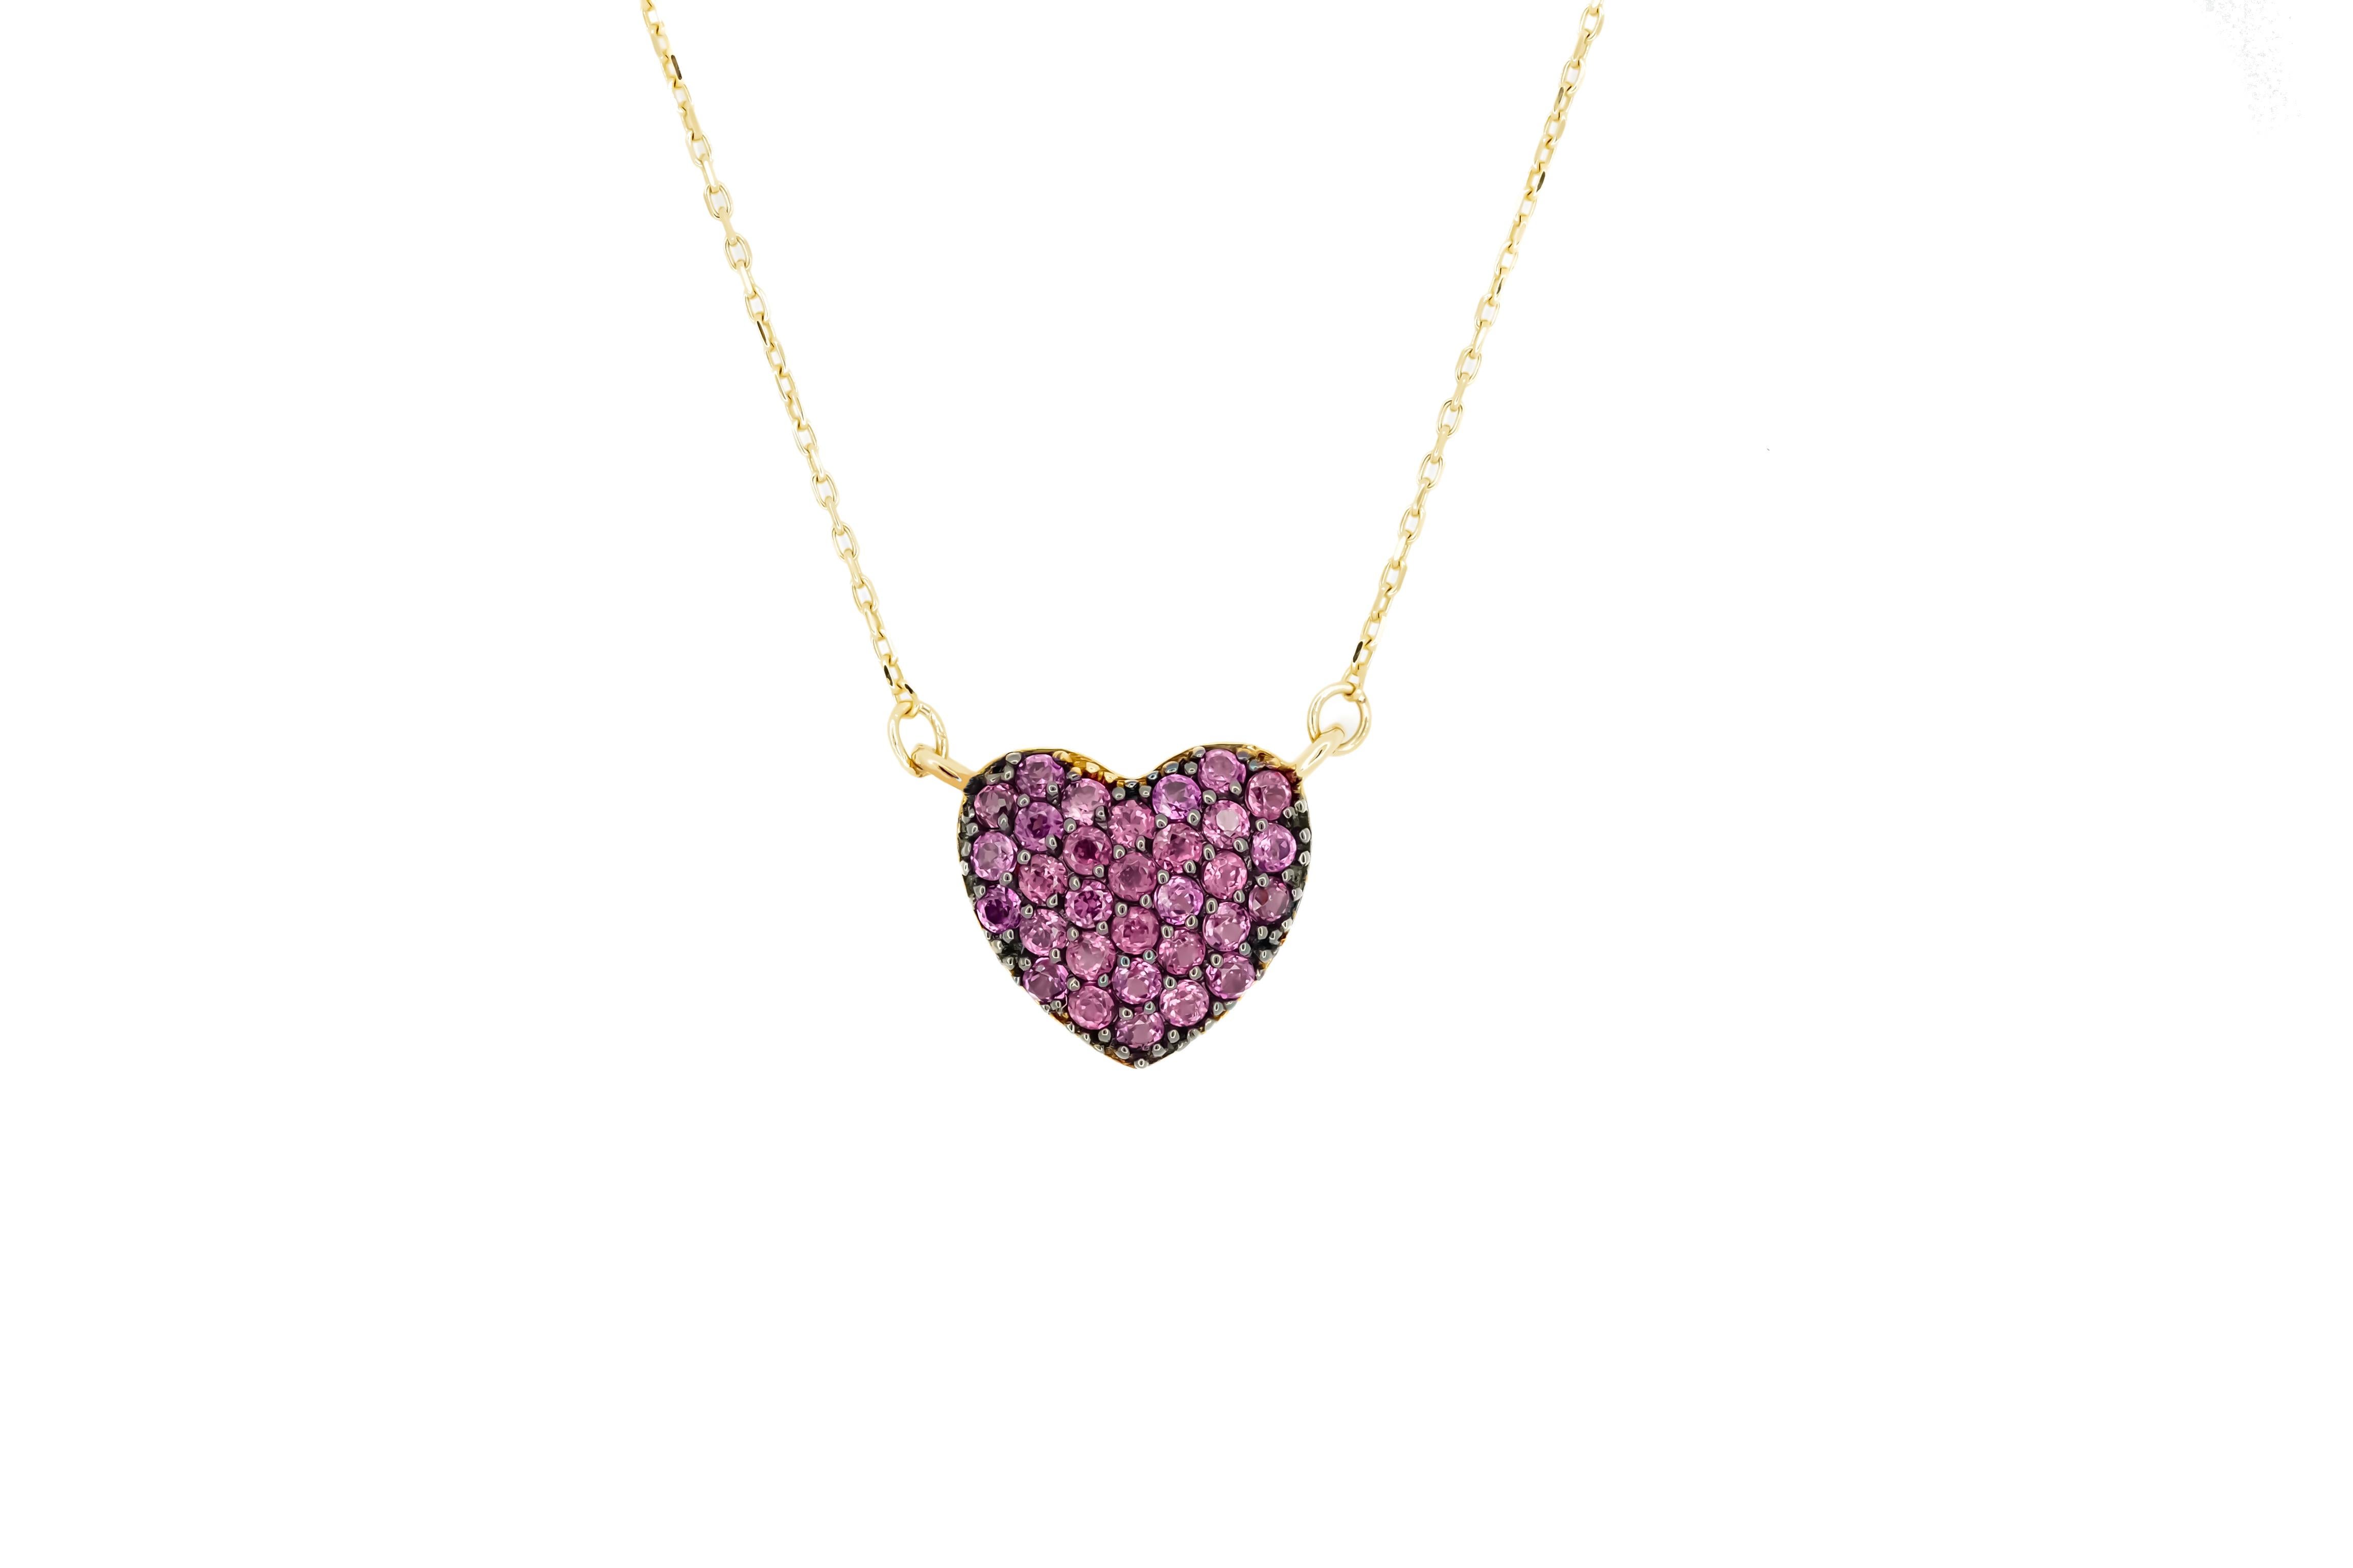 Heart Pendant necklace in 14k gold  2